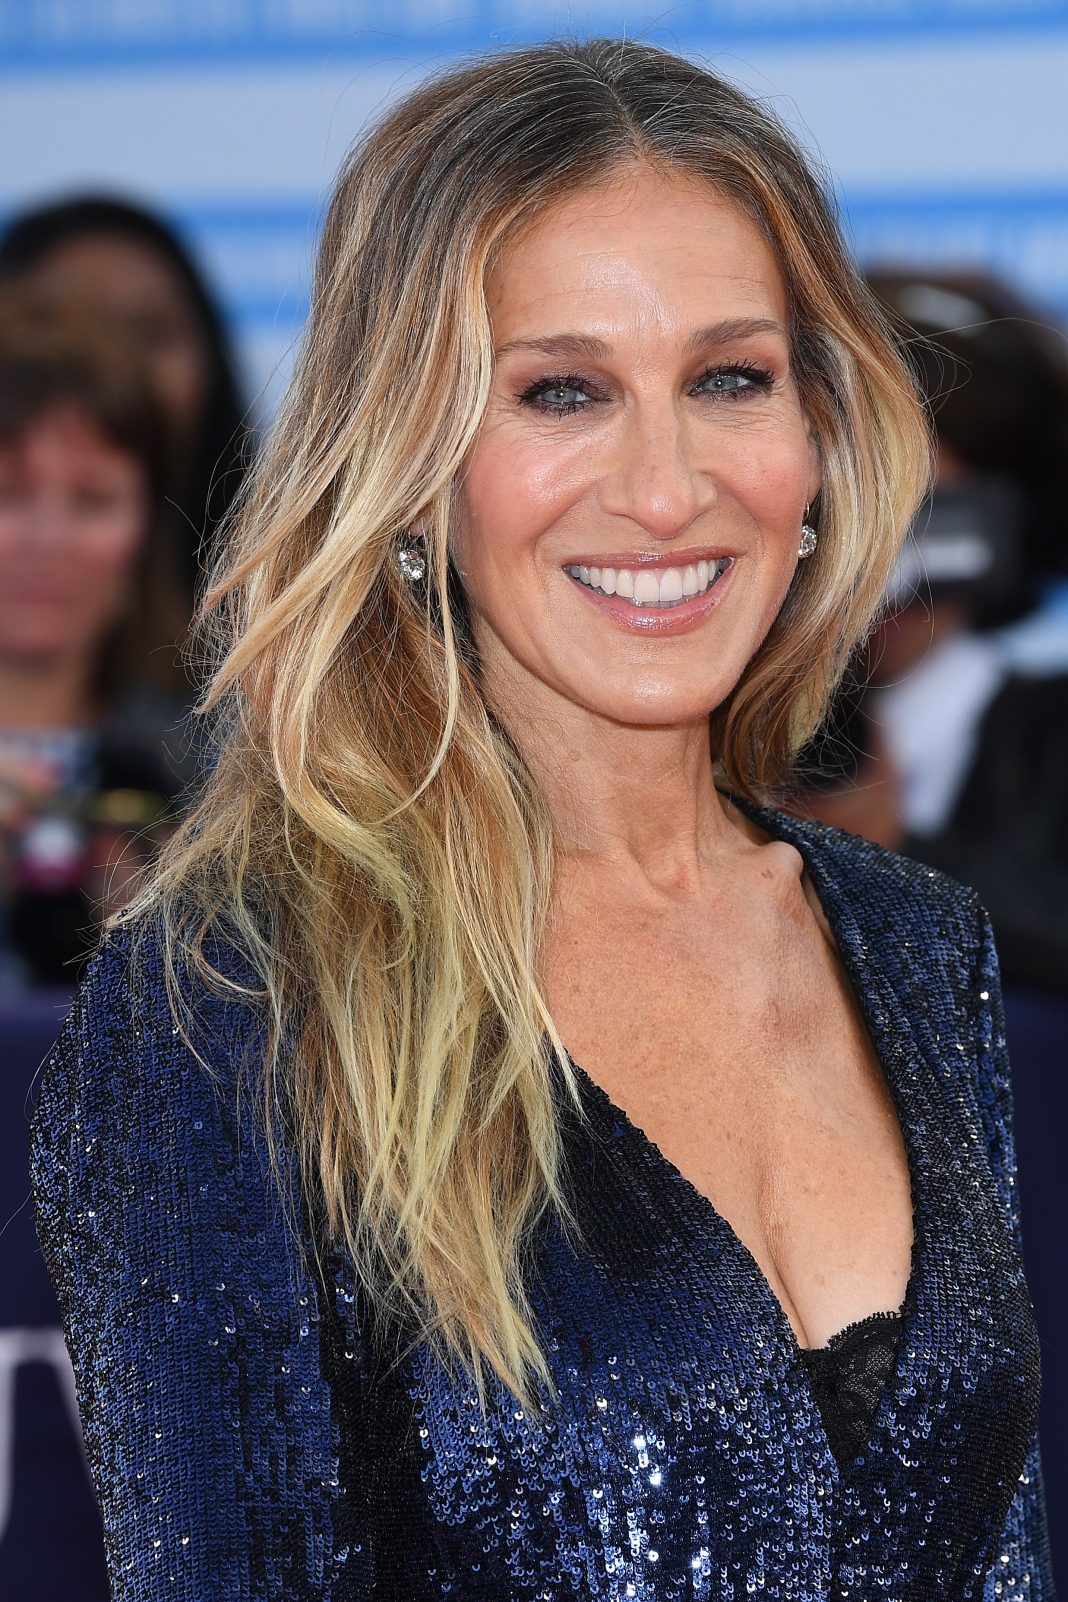 sarah-jessica-parker-just-brought-1999-carrie-bradshaw-back-with-this-blonde-blowout-— see-the-photos